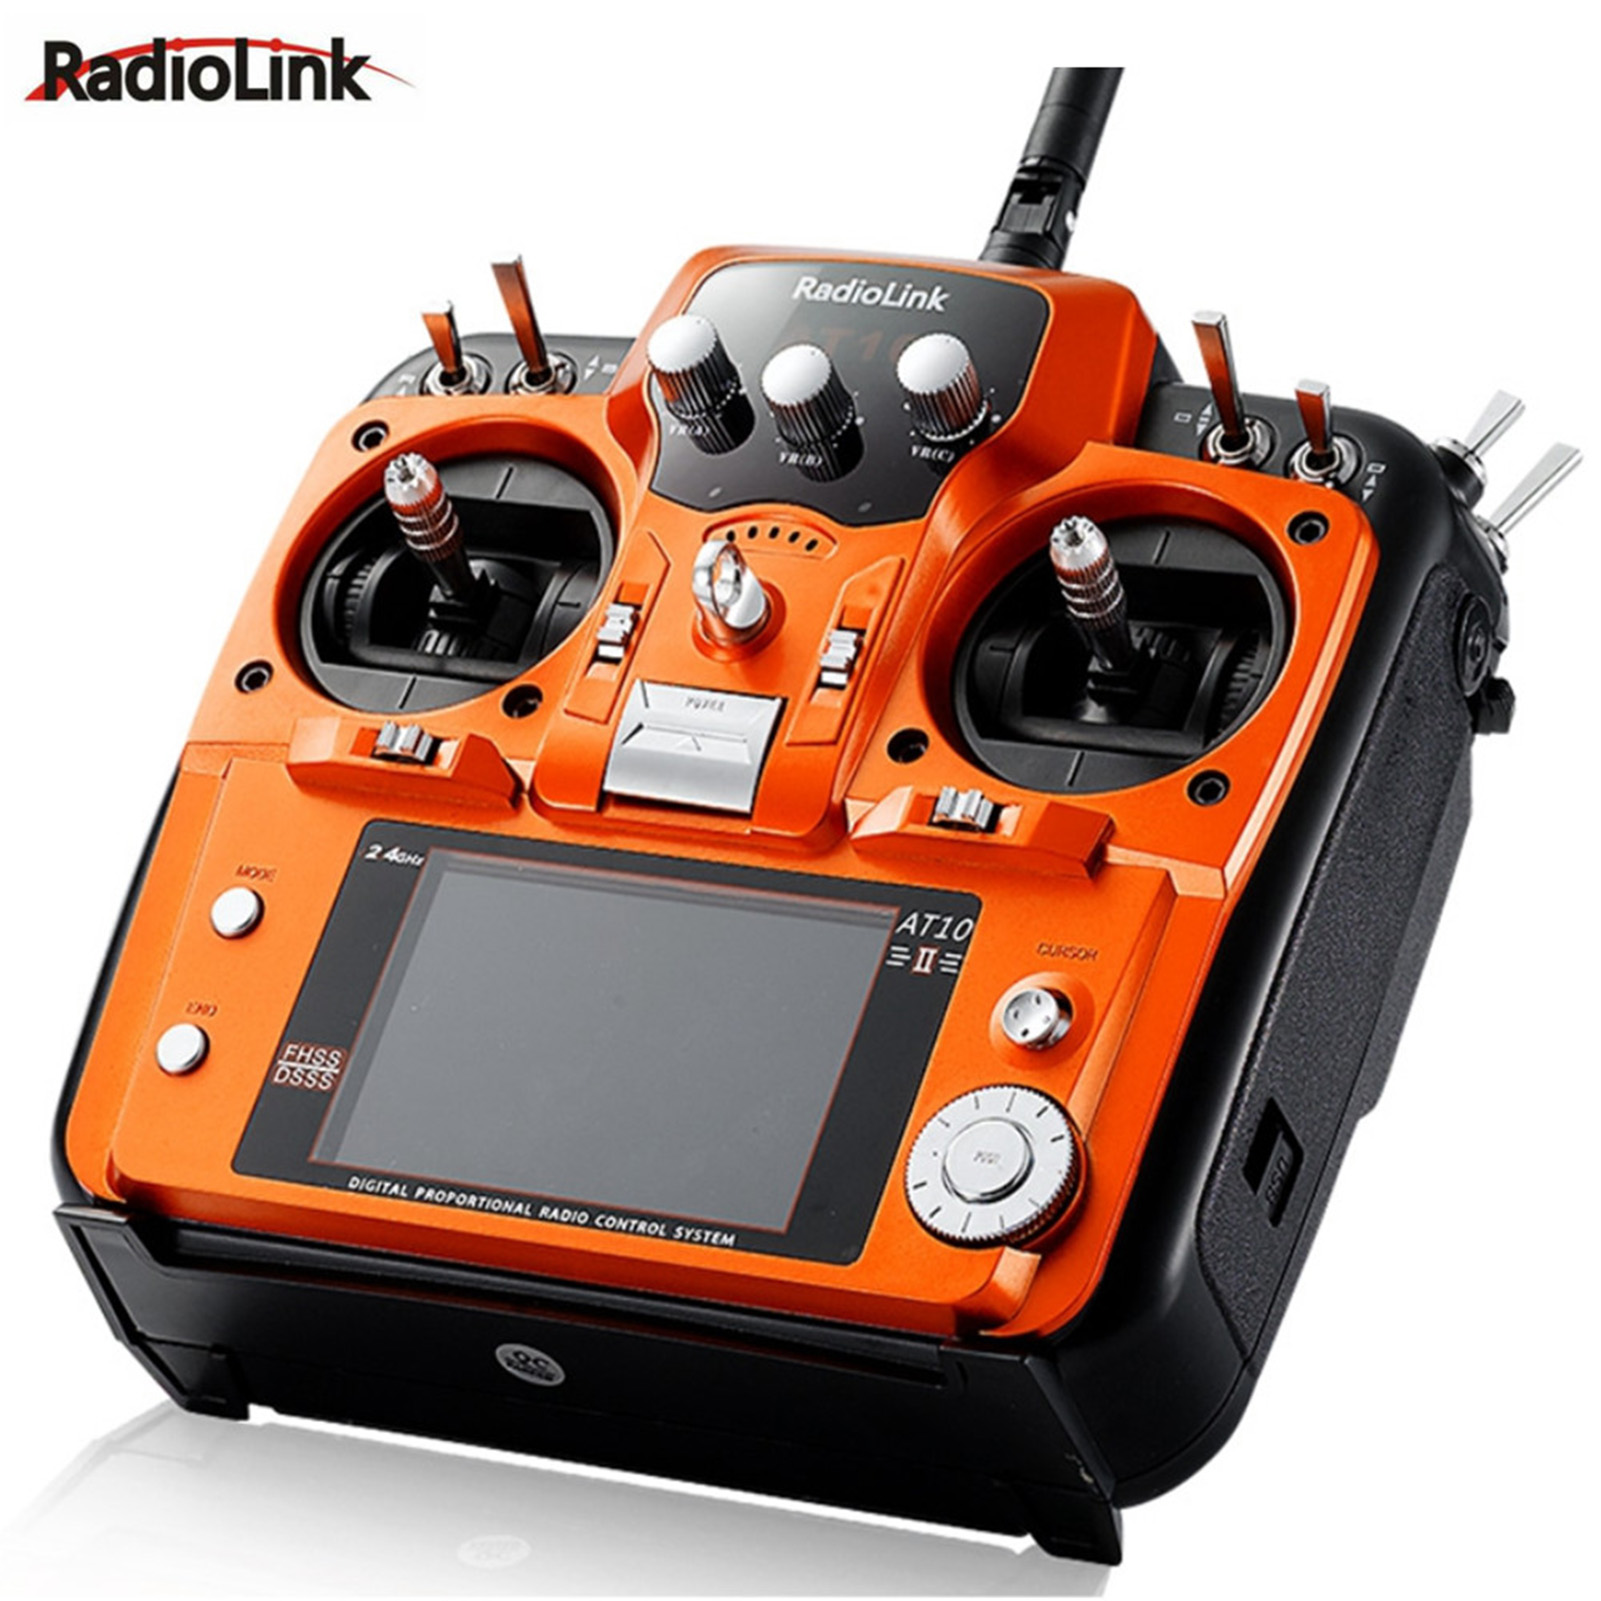 Radiolink 12CH RC Controller and Receiver for Drones